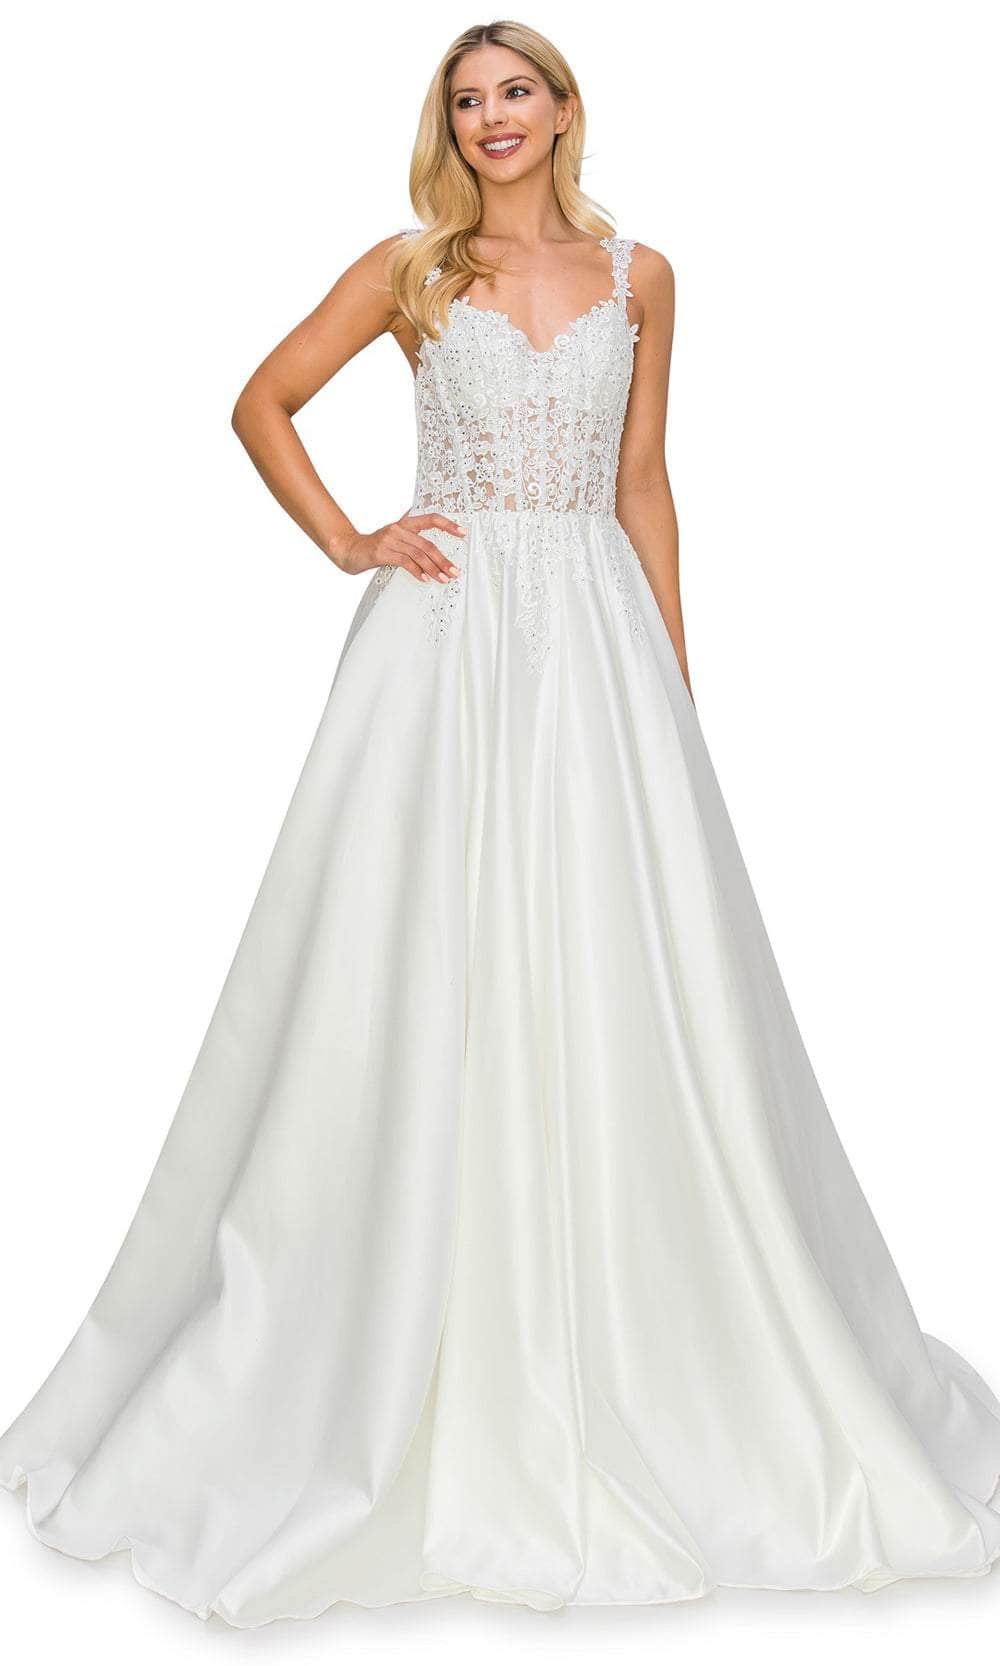 Image of Cinderella Couture 8041J - Sleeveless Corset Embroidered Bridal Dress